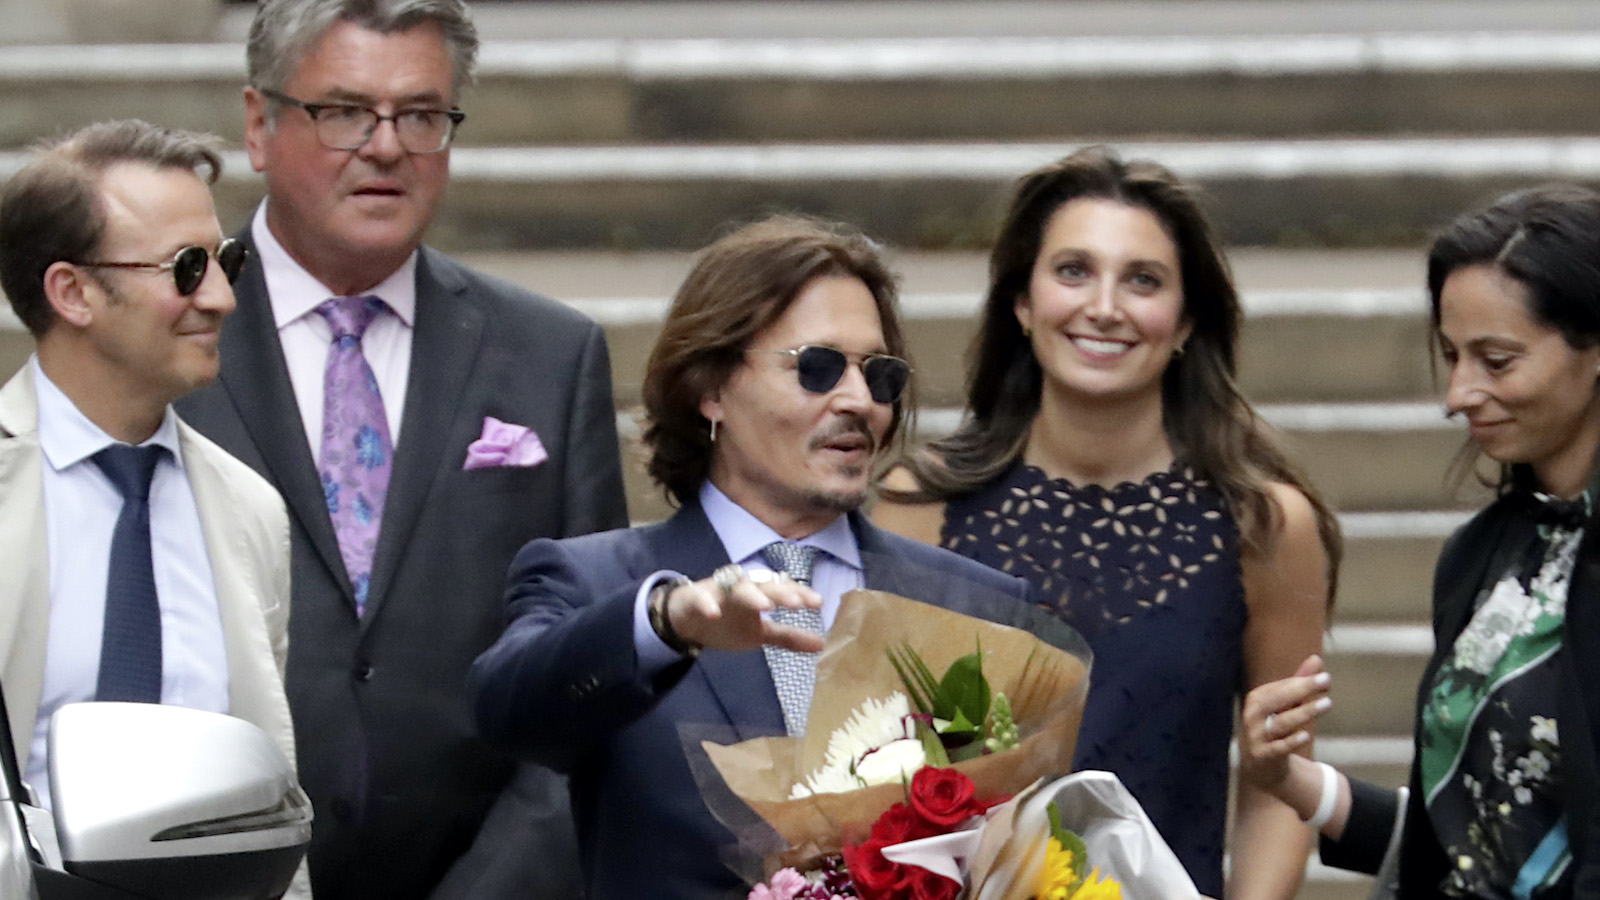 Johnny Depp outside courthouse of U.K. defamation trial, holding a bouqet of flowers. Joelle Rich stands behind him